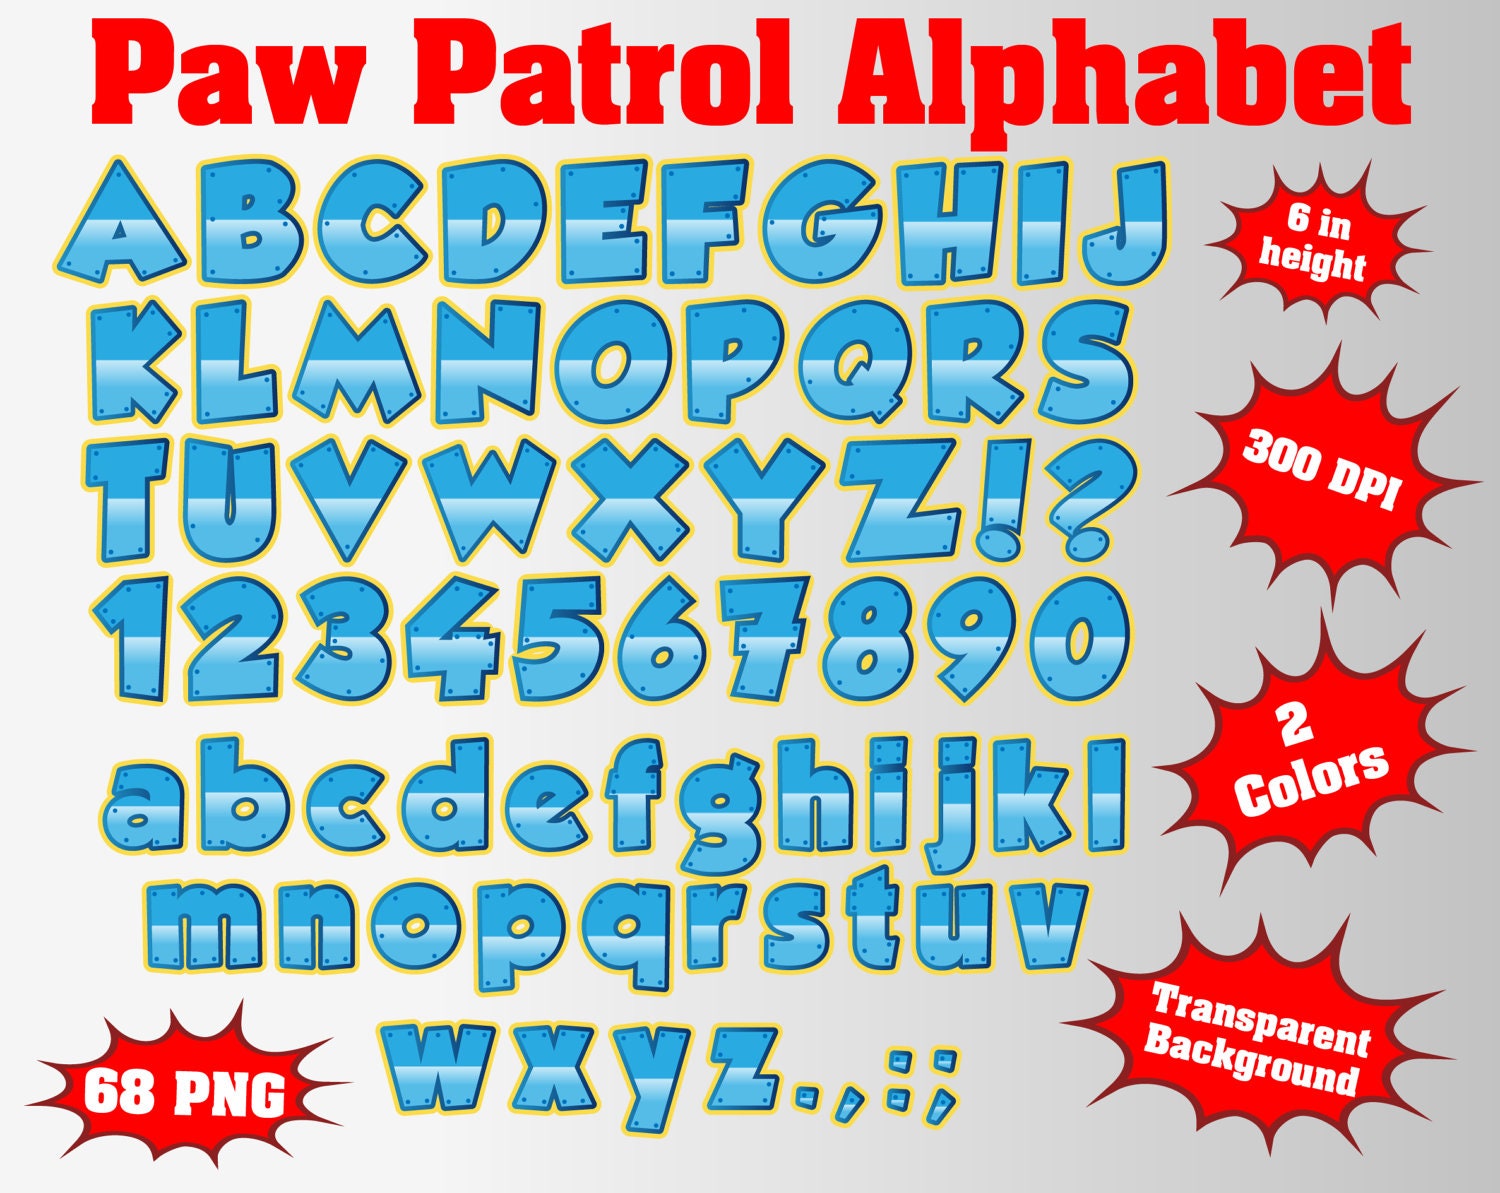 Paw Patrol Full Alphabet Numbers and Symbols 68 PNG/SVG